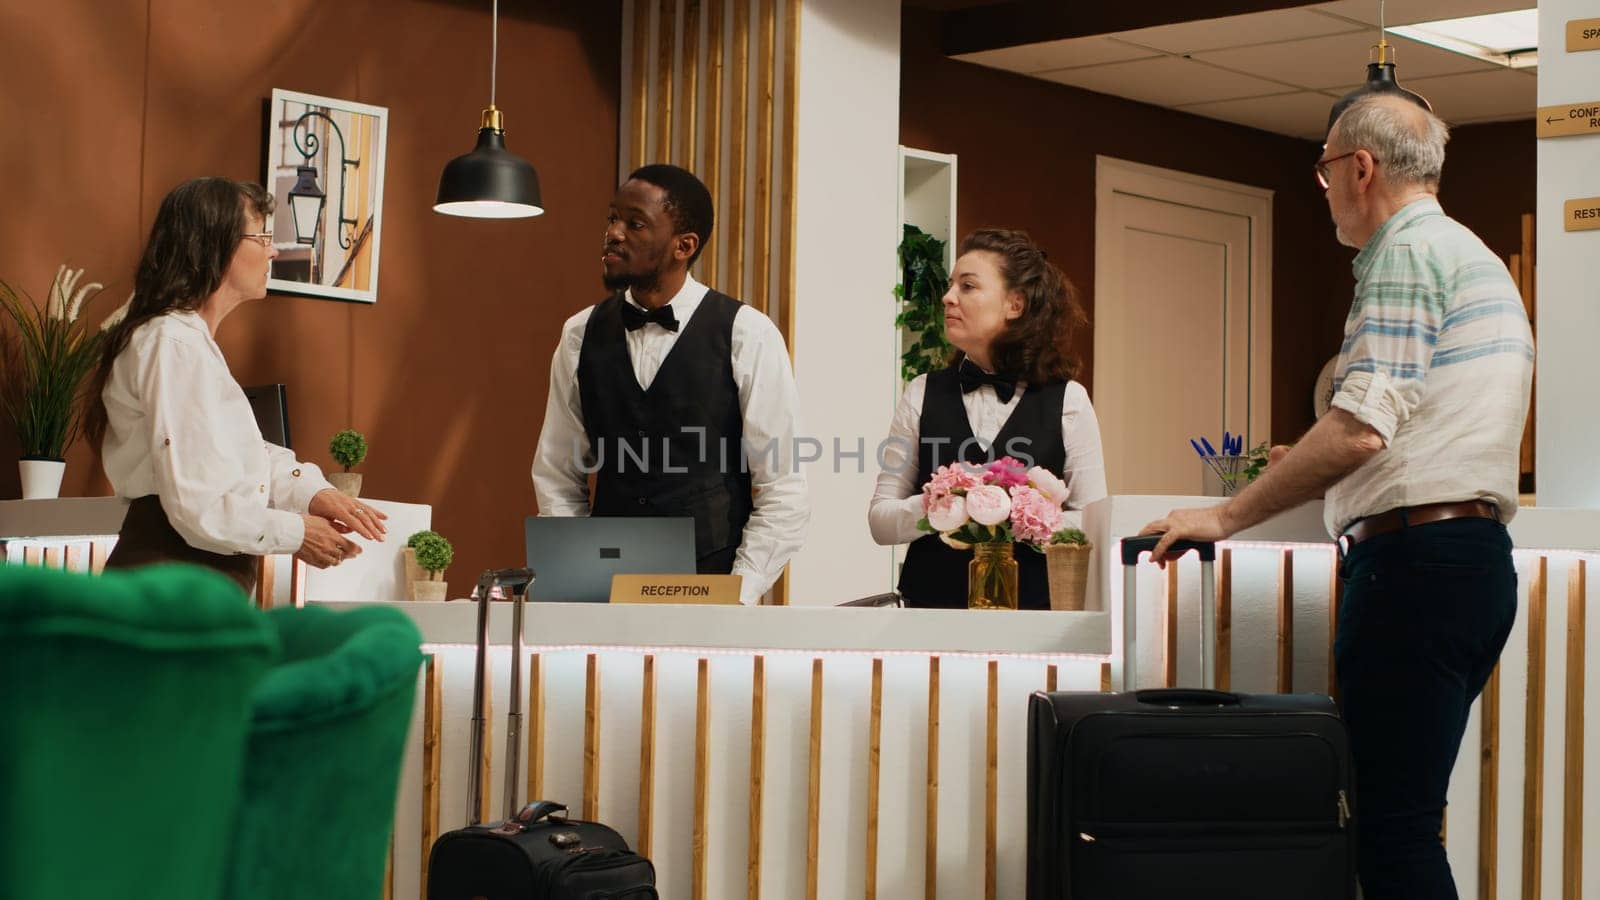 After check in verification, retired people receive room access with key card at hotel. Diverse employees assisting older couple with luggage, providing luxurious concierge services. Handheld shot.